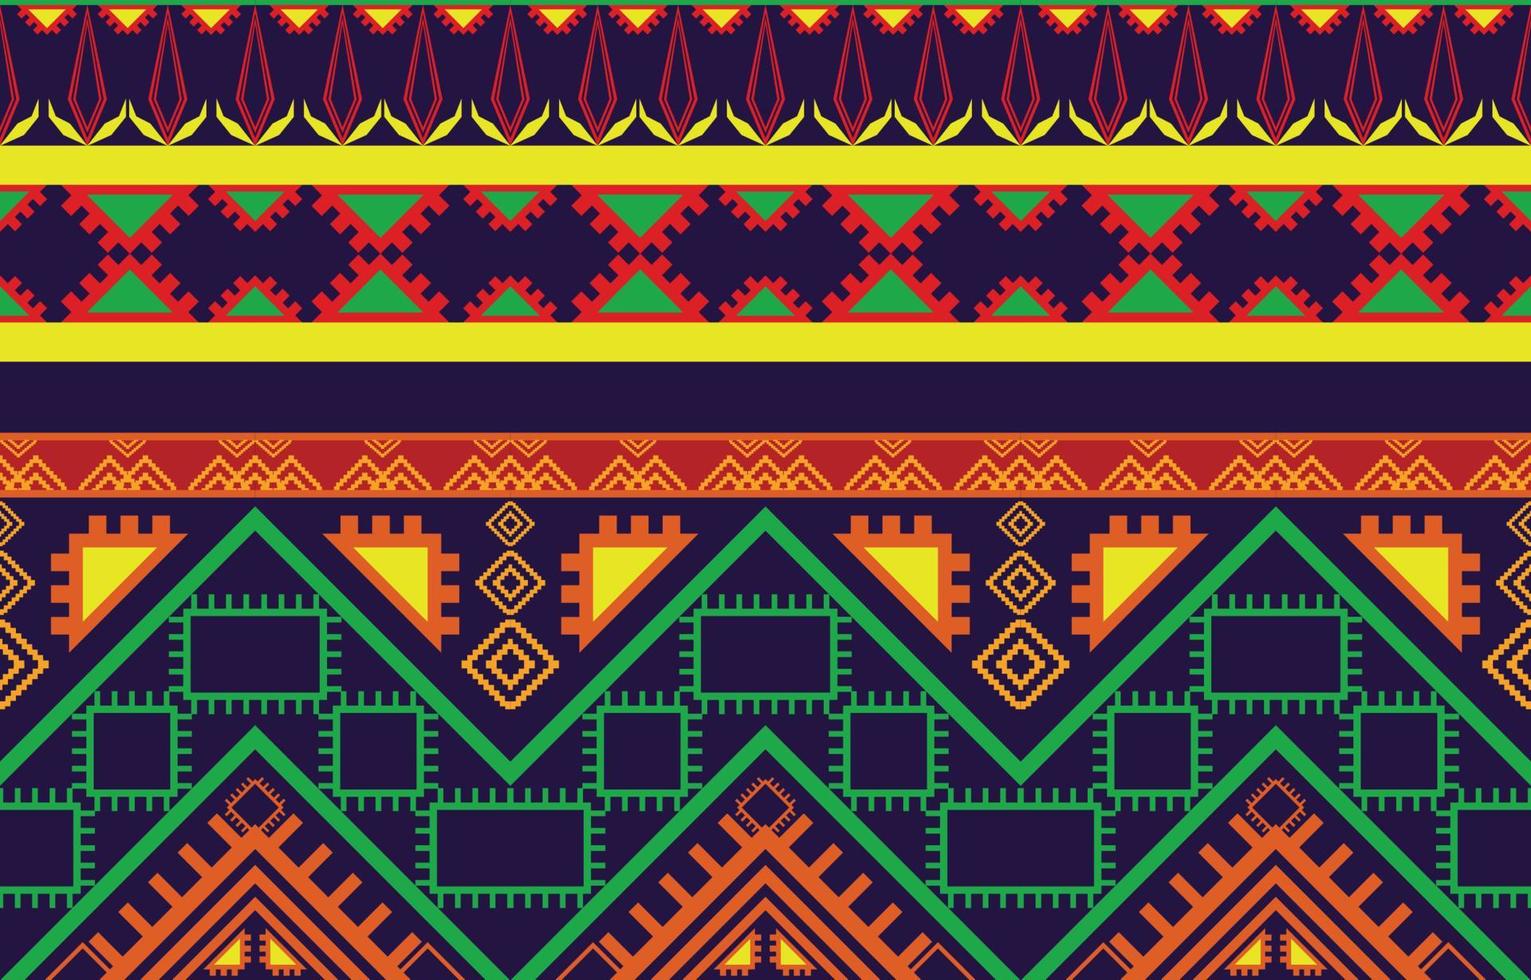 Geometric oriental tribal ethnic pattern traditional background Design for carpet,wallpaper,clothing,wrapping,batik,fabric,Vector illustration embroidery style. vector